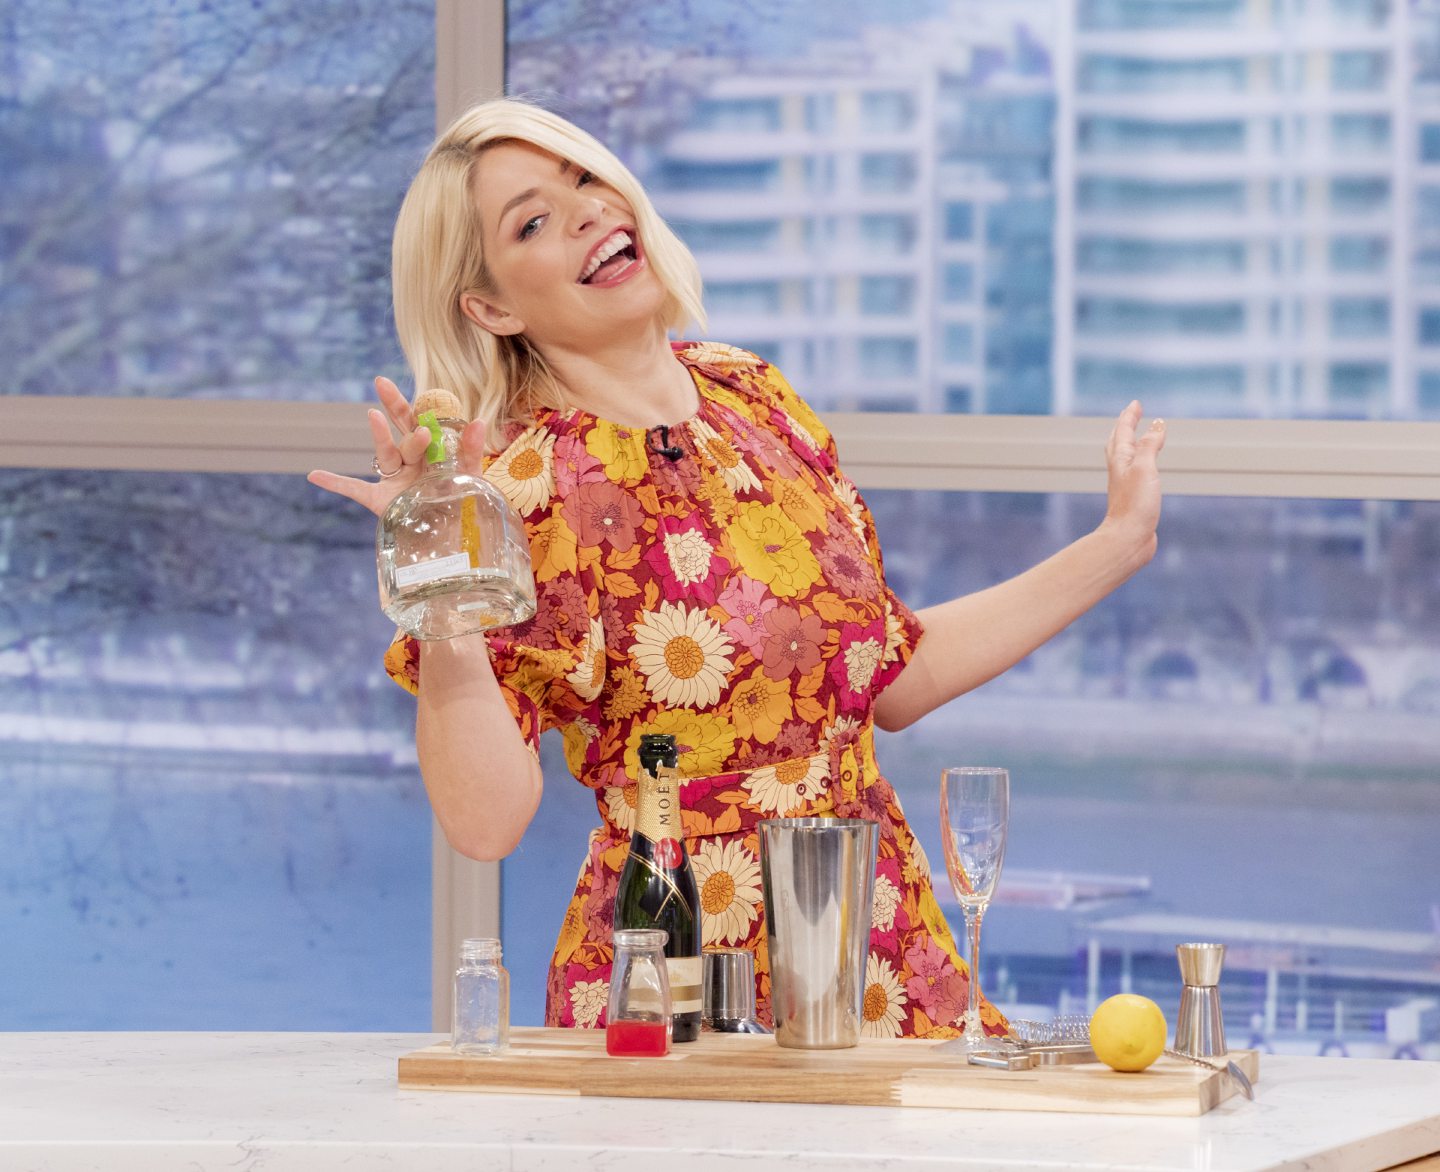 Holly Willoughy on the set of This Morning.